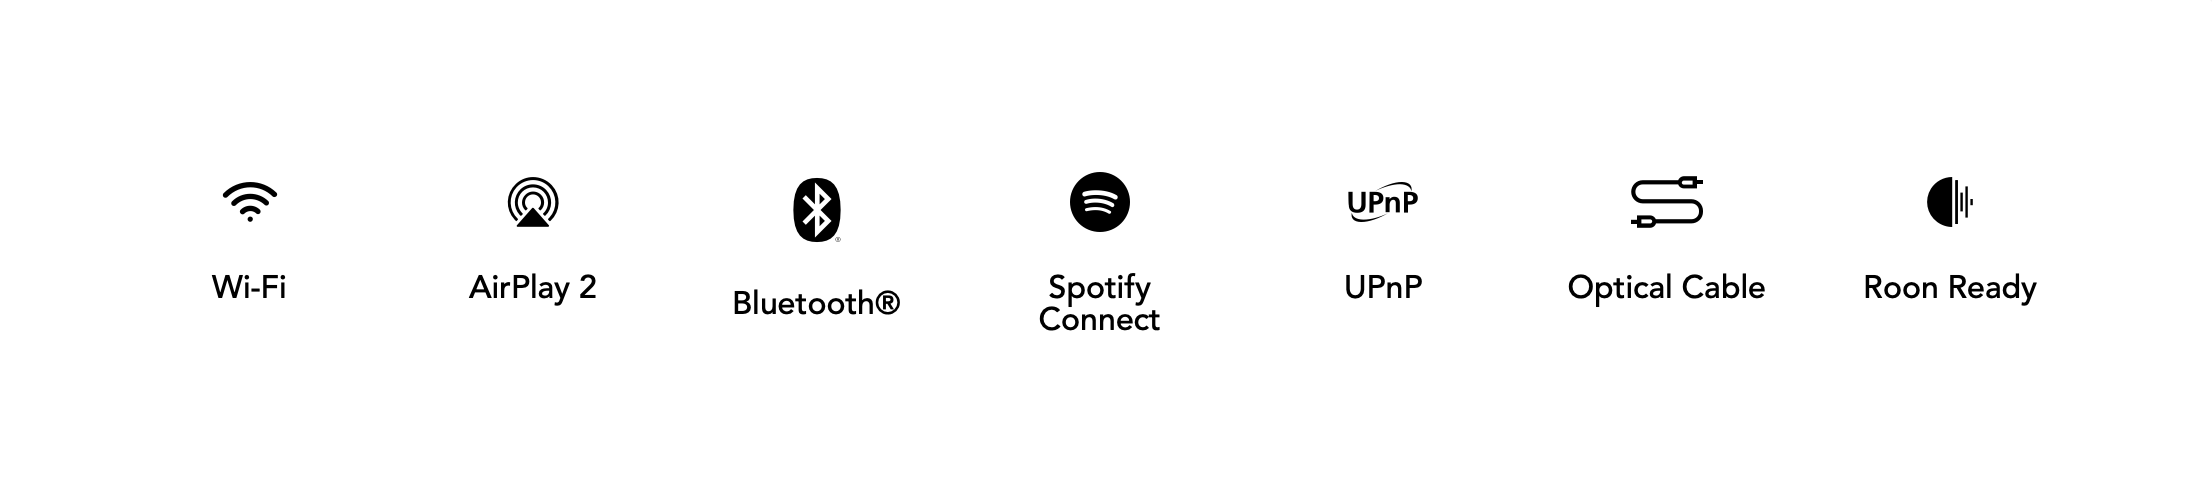 devialet-connection-icons.png